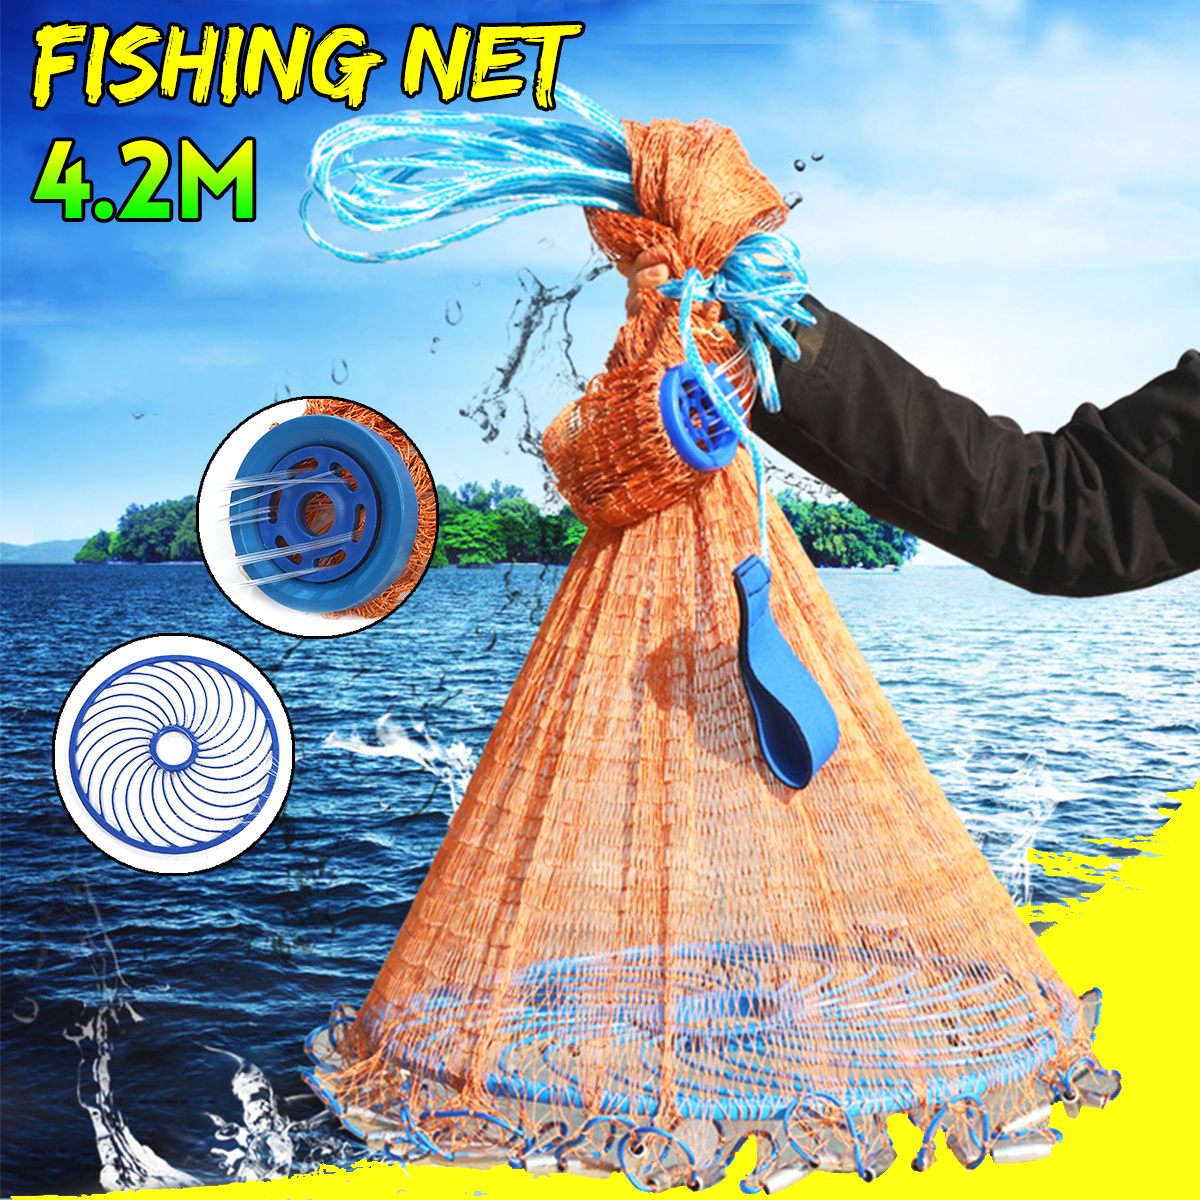 42m-14FT-Hand-Easy-Throw-Manual-Fishing-Net-Outdoor-Hunting-Fishing-Bait-Network-Tools-1560508-1